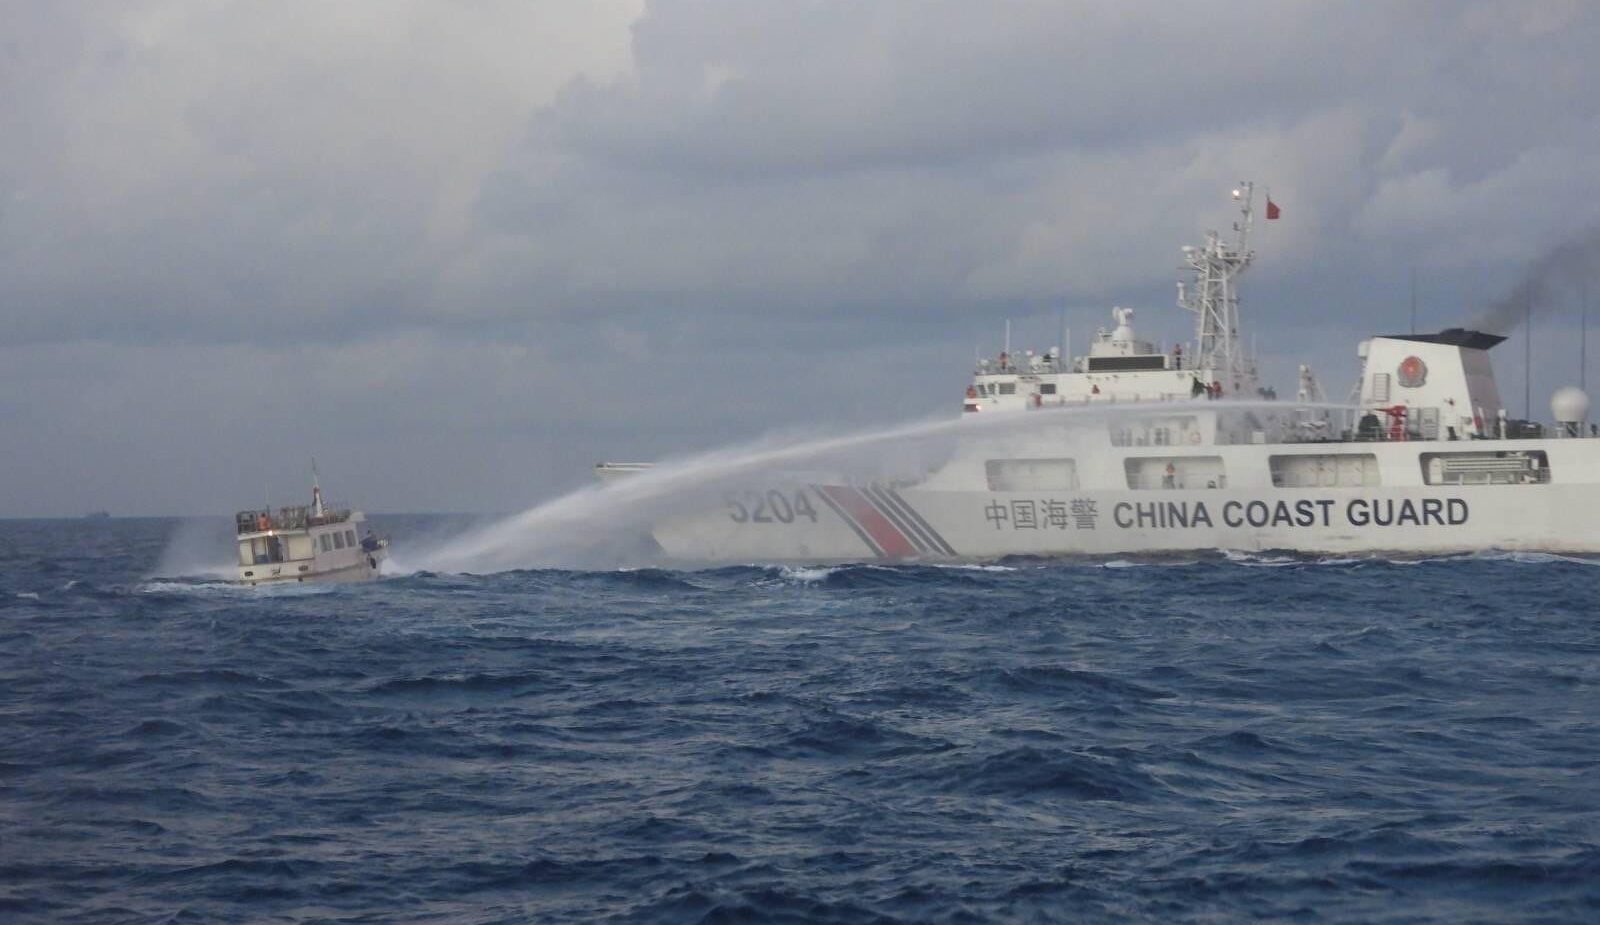 Chinese Defense Ministry Spokesperson Wu Qian told the United States to stop meddling with the West Philippine Sea issue, saying that the dispute is between China and the Philippines and it has nothing to do with any "third party."